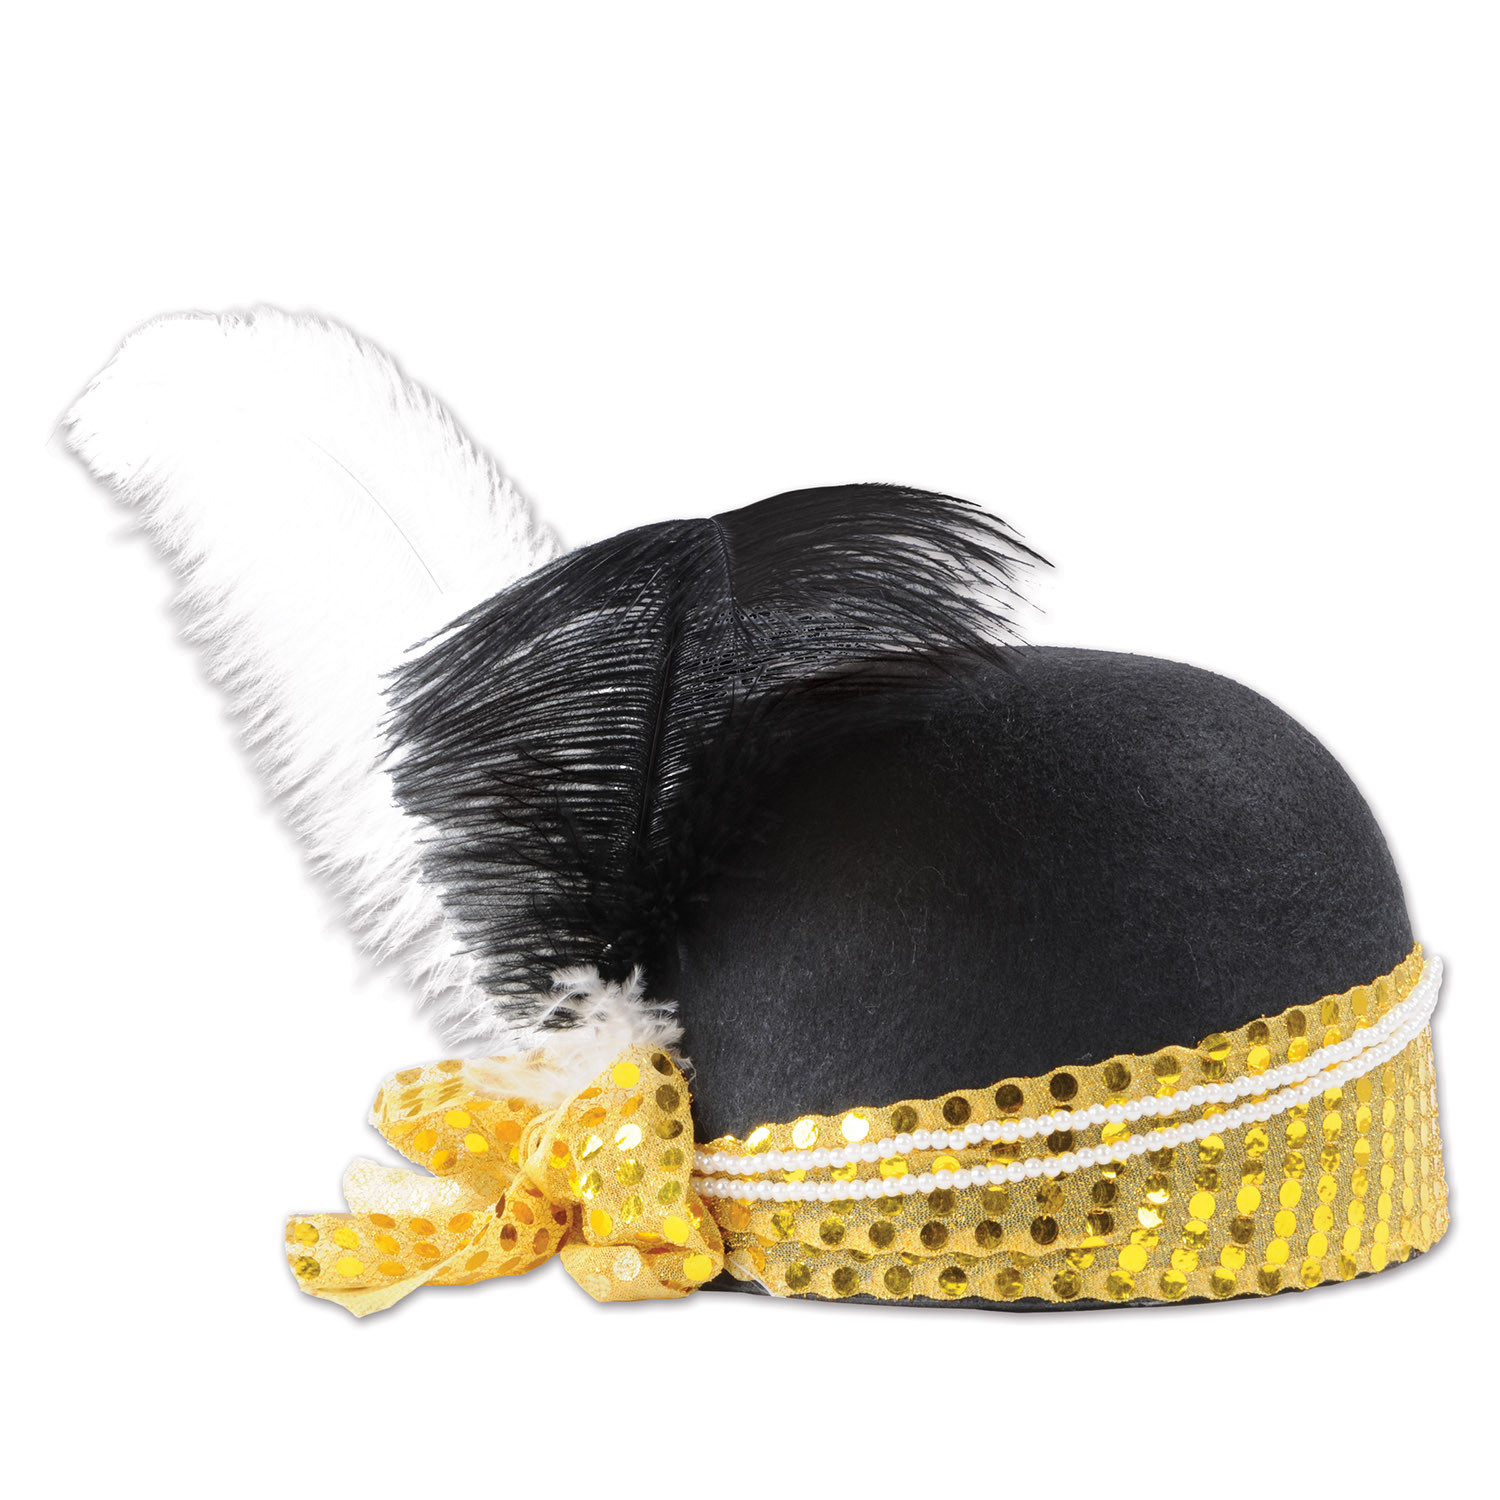 Black felt hat with gold sequined scarf tied around the front, embelished with a string of pearls and a white and black feather. 